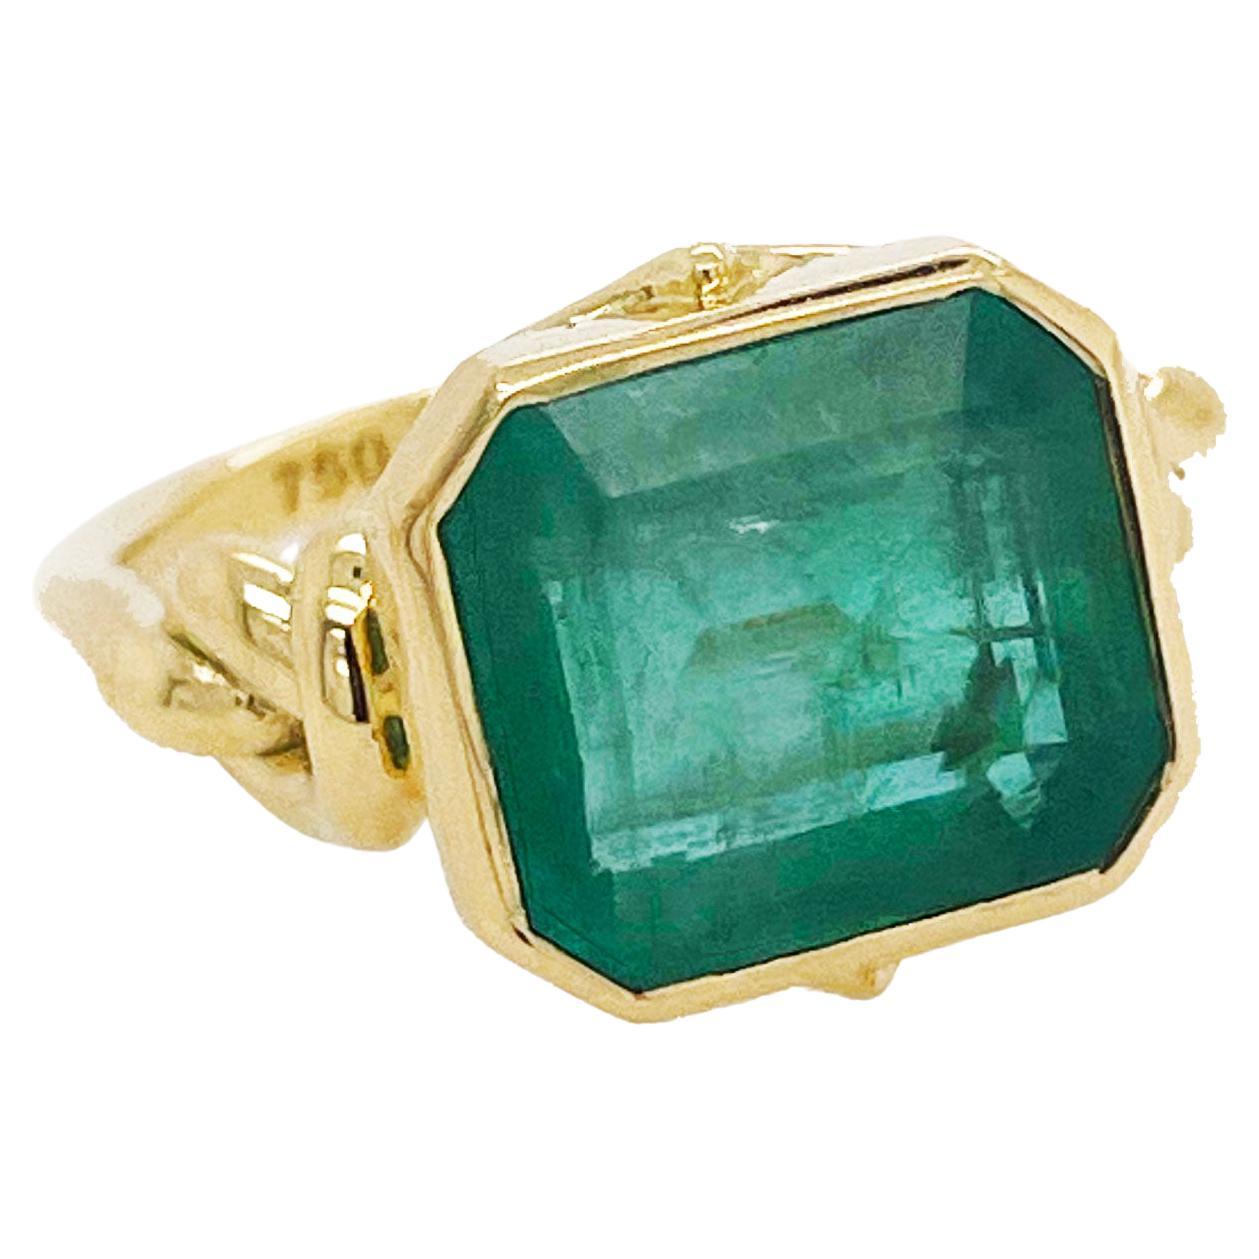 5.40ct Emerald Ring in 18ct Yellow Gold bezel set